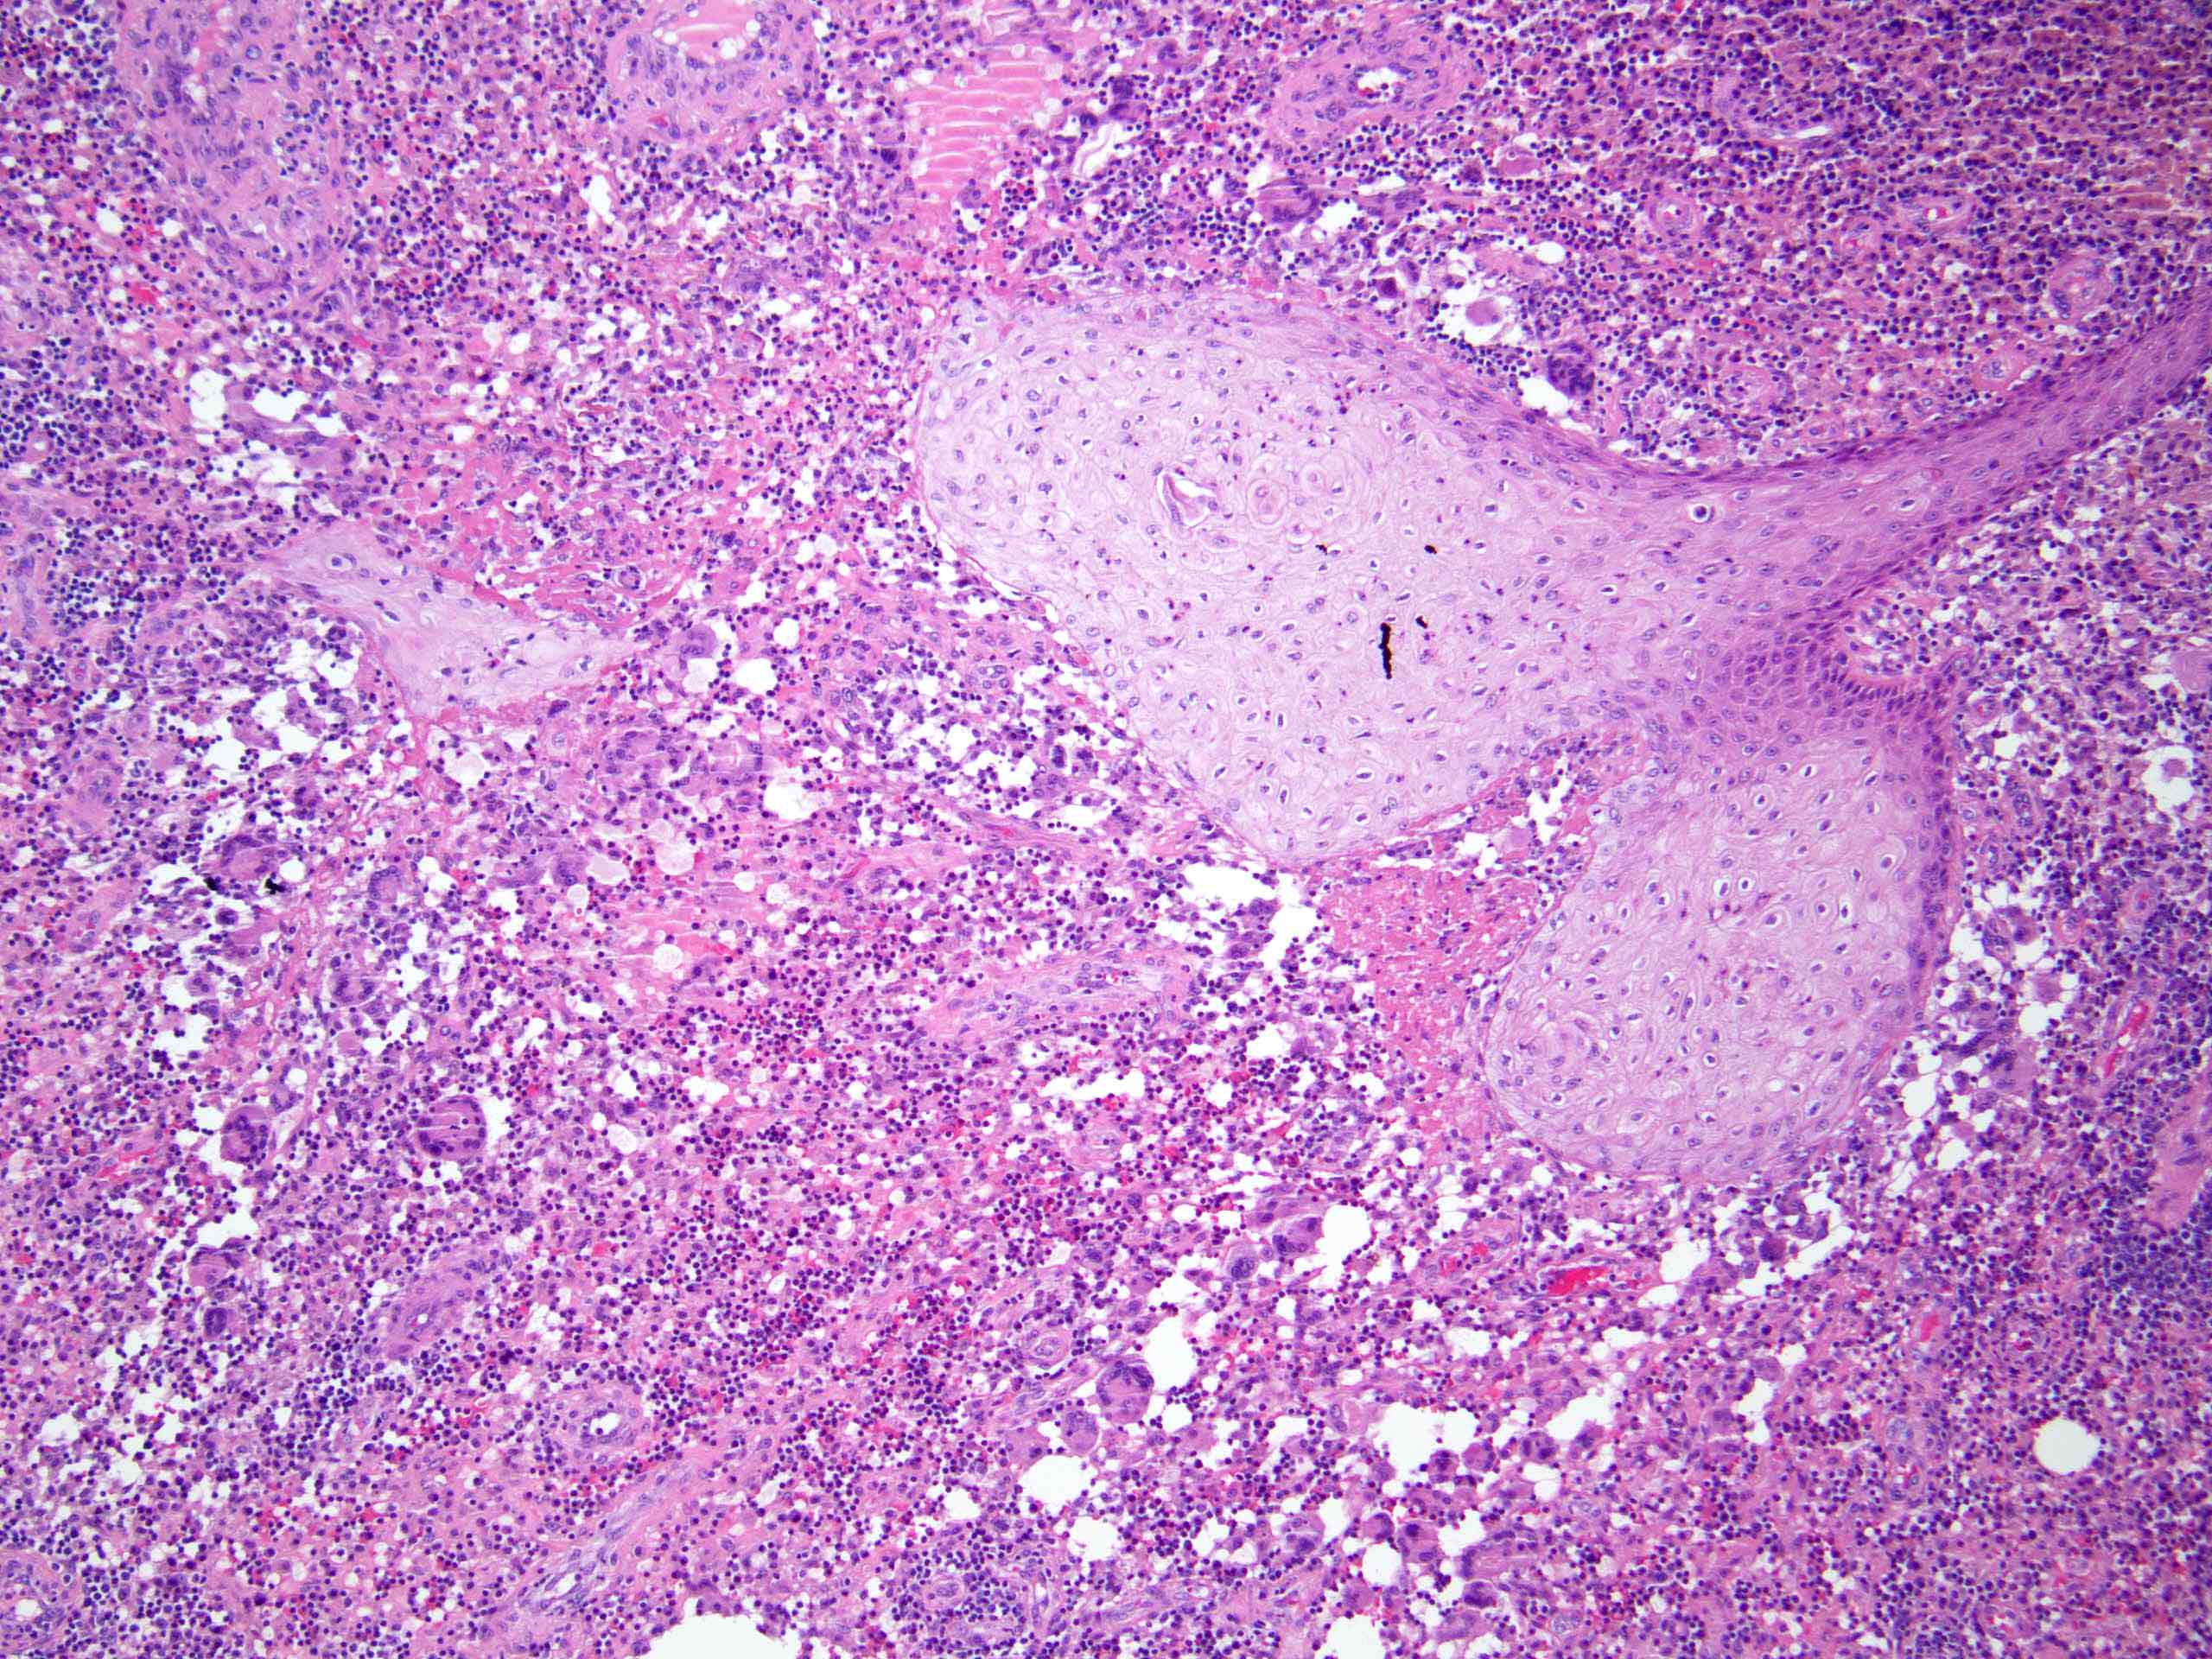 Epithelial remnants with inflammation